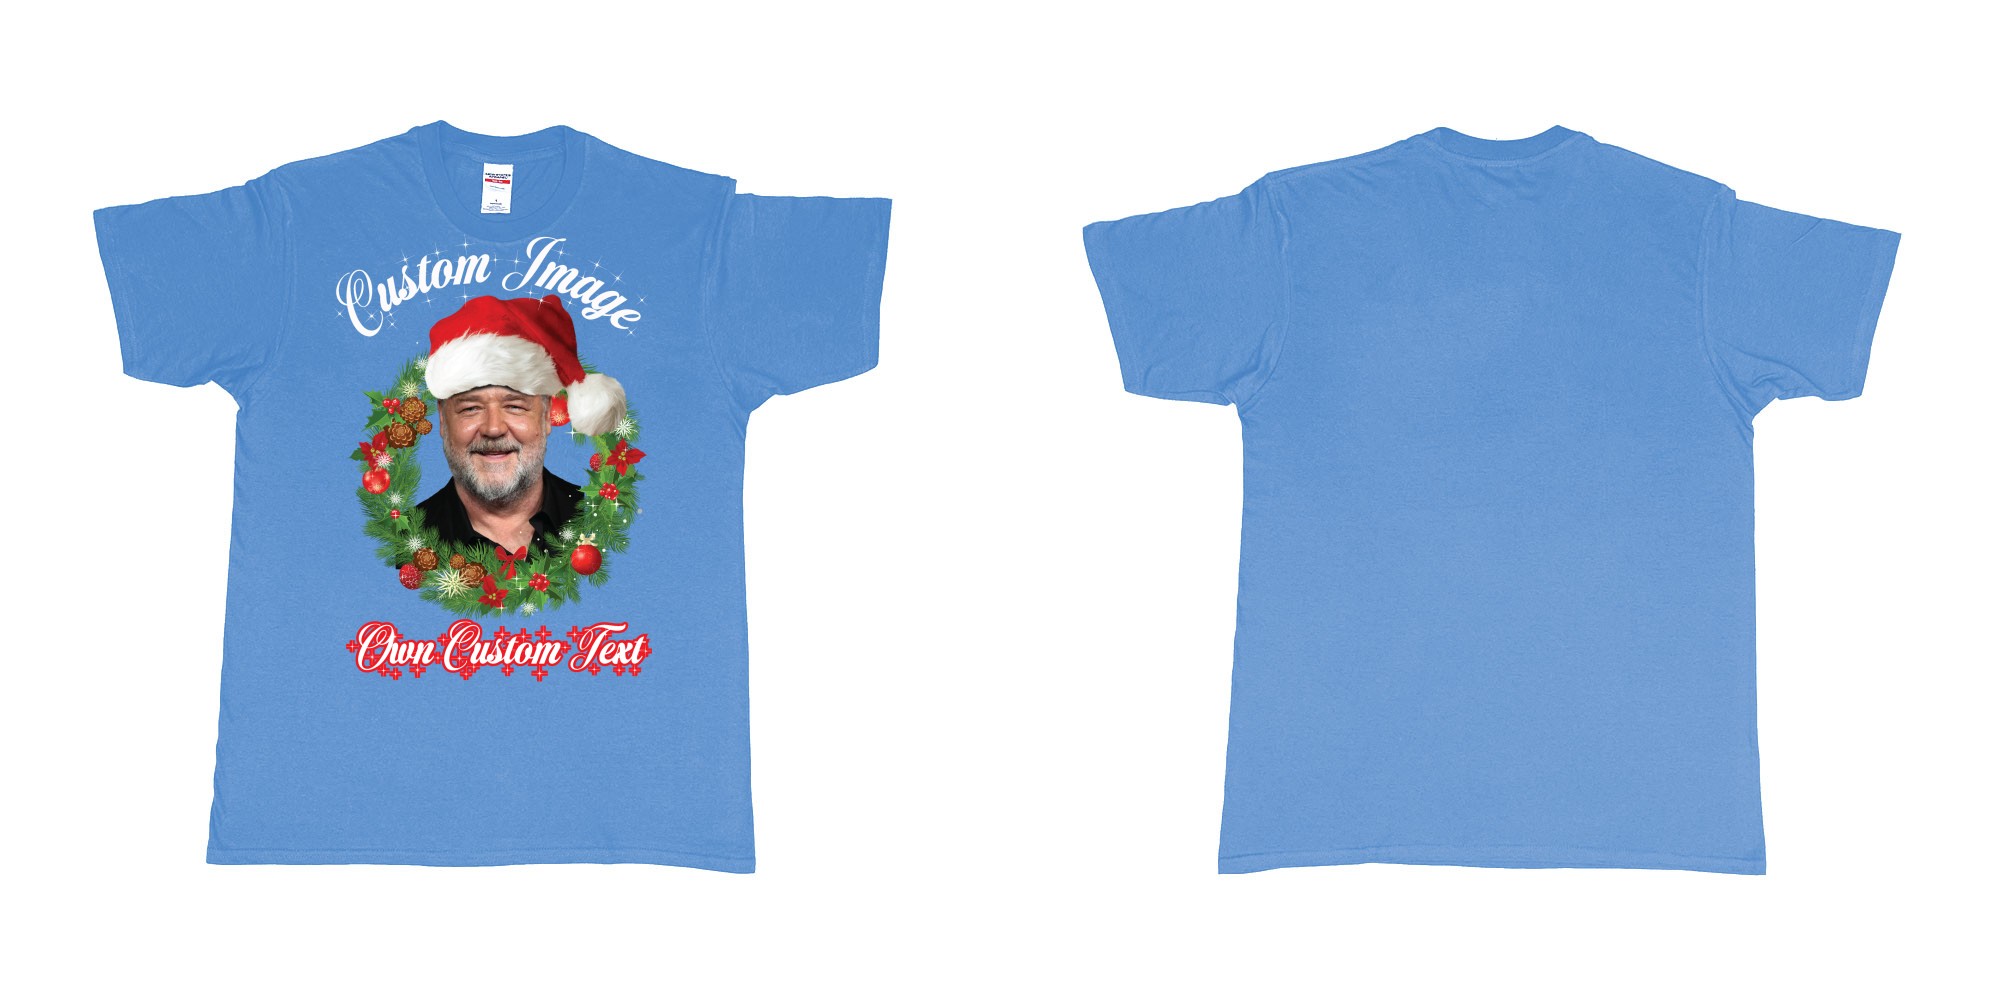 Custom tshirt design christmas wreath custom face image text in fabric color carolina-blue choice your own text made in Bali by The Pirate Way